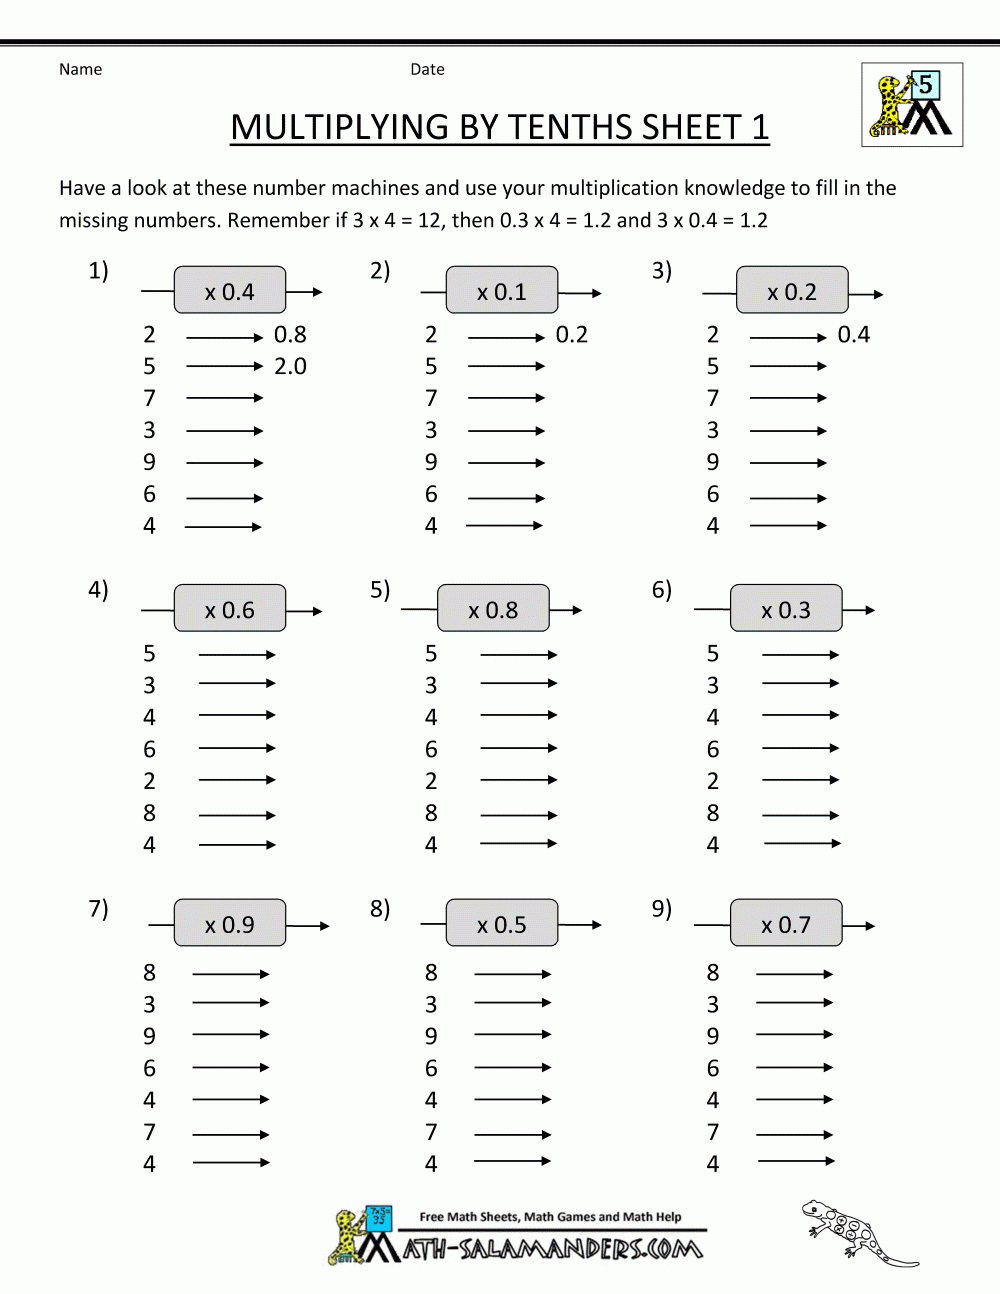 Multiplication Fact Sheet Collection - Multiplying Decimals Free Printable Worksheets